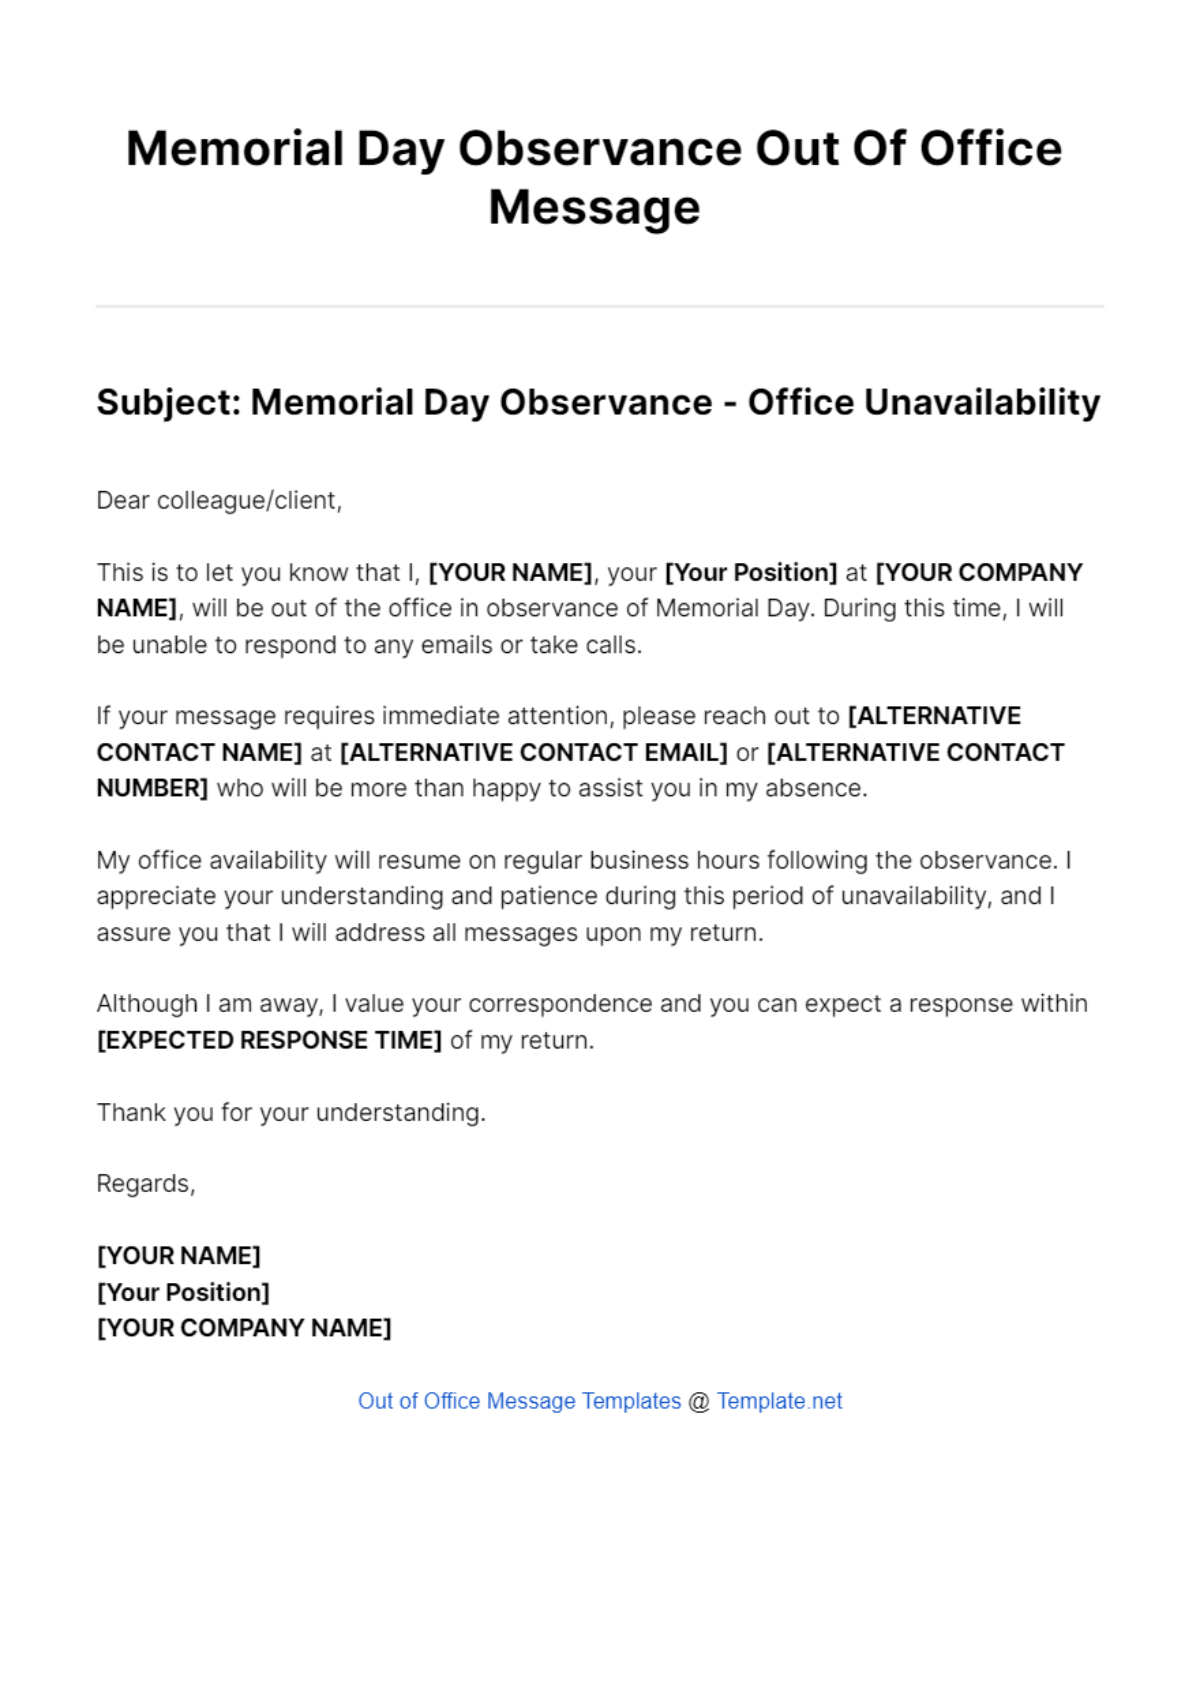 Free Memorial Day Observance Out Of Office Message Template